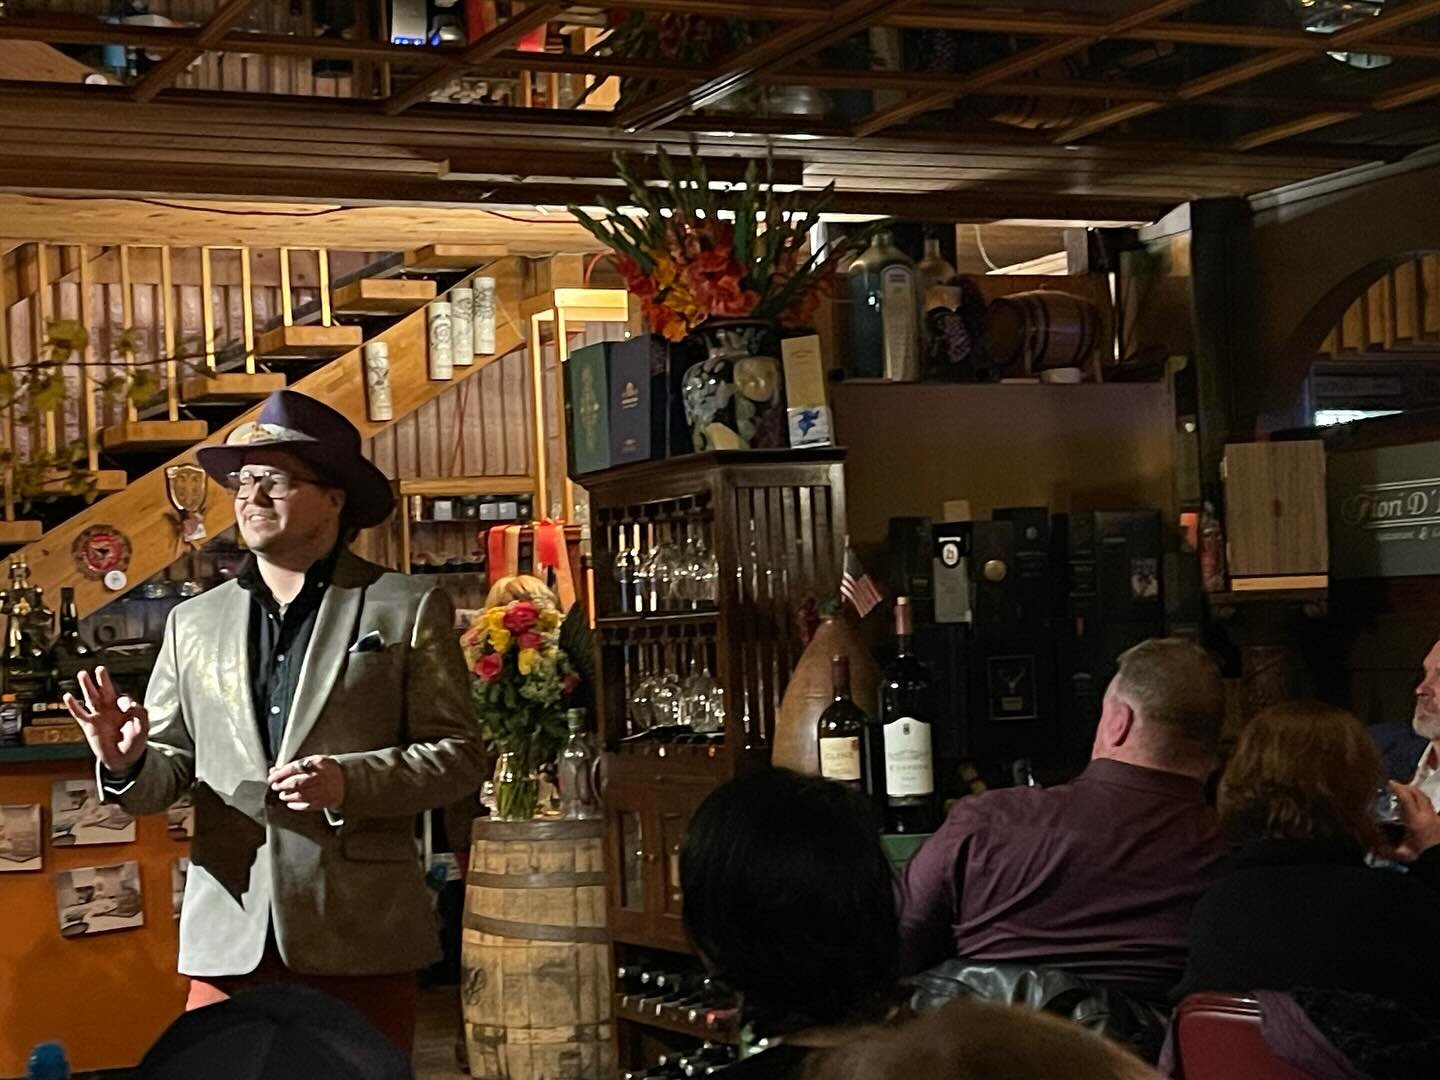 &quot;Without a doubt, this whiskey dinner ranks as the finest I've ever attended or had the privilege of being a part of! Thank you @alaskawhiskygodfather for your generous support in making this event possible.&quot;